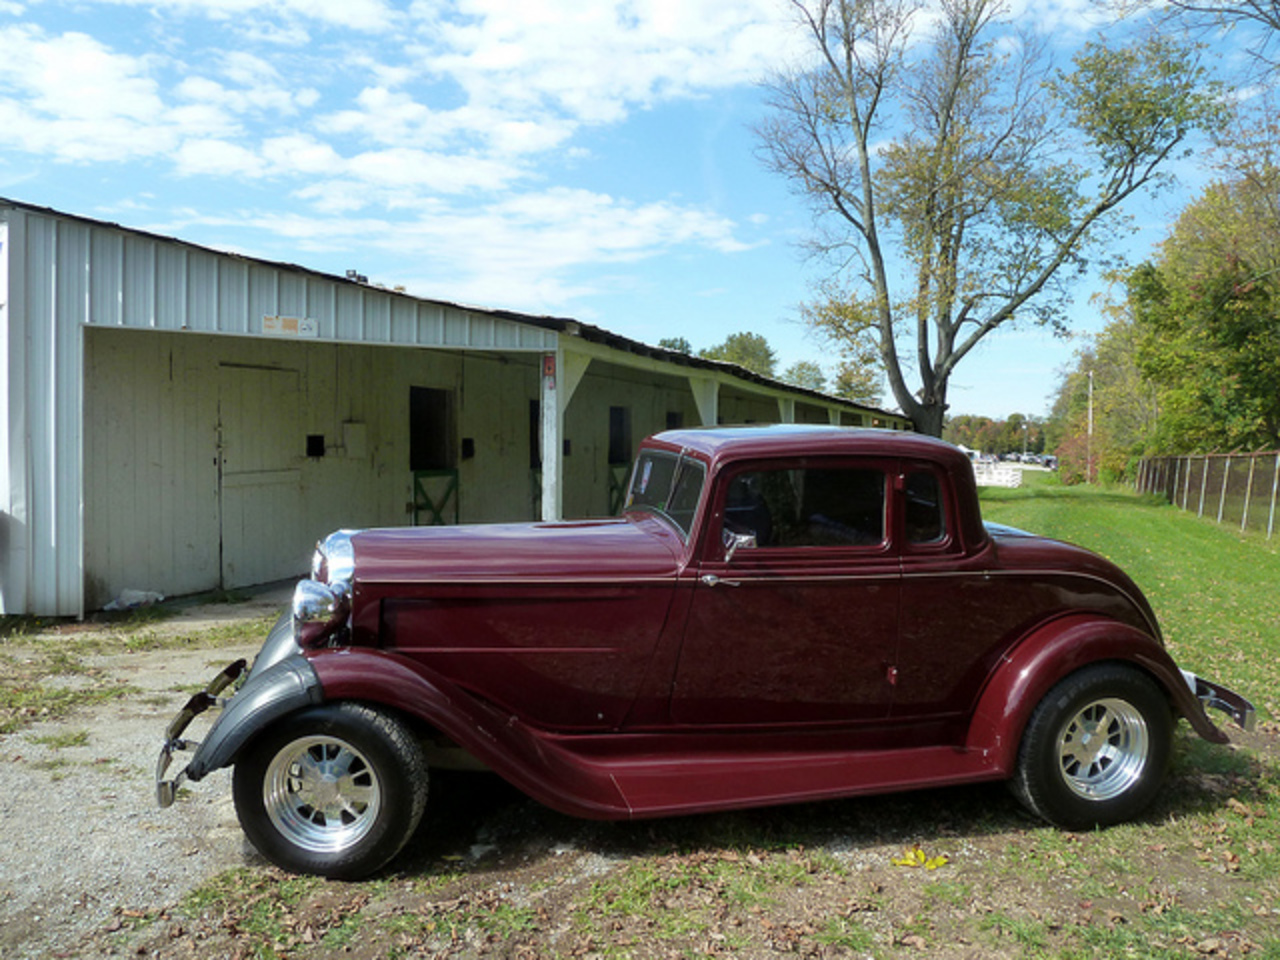 1933 (?) Dodge Coupe | Flickr - Photo Sharing!